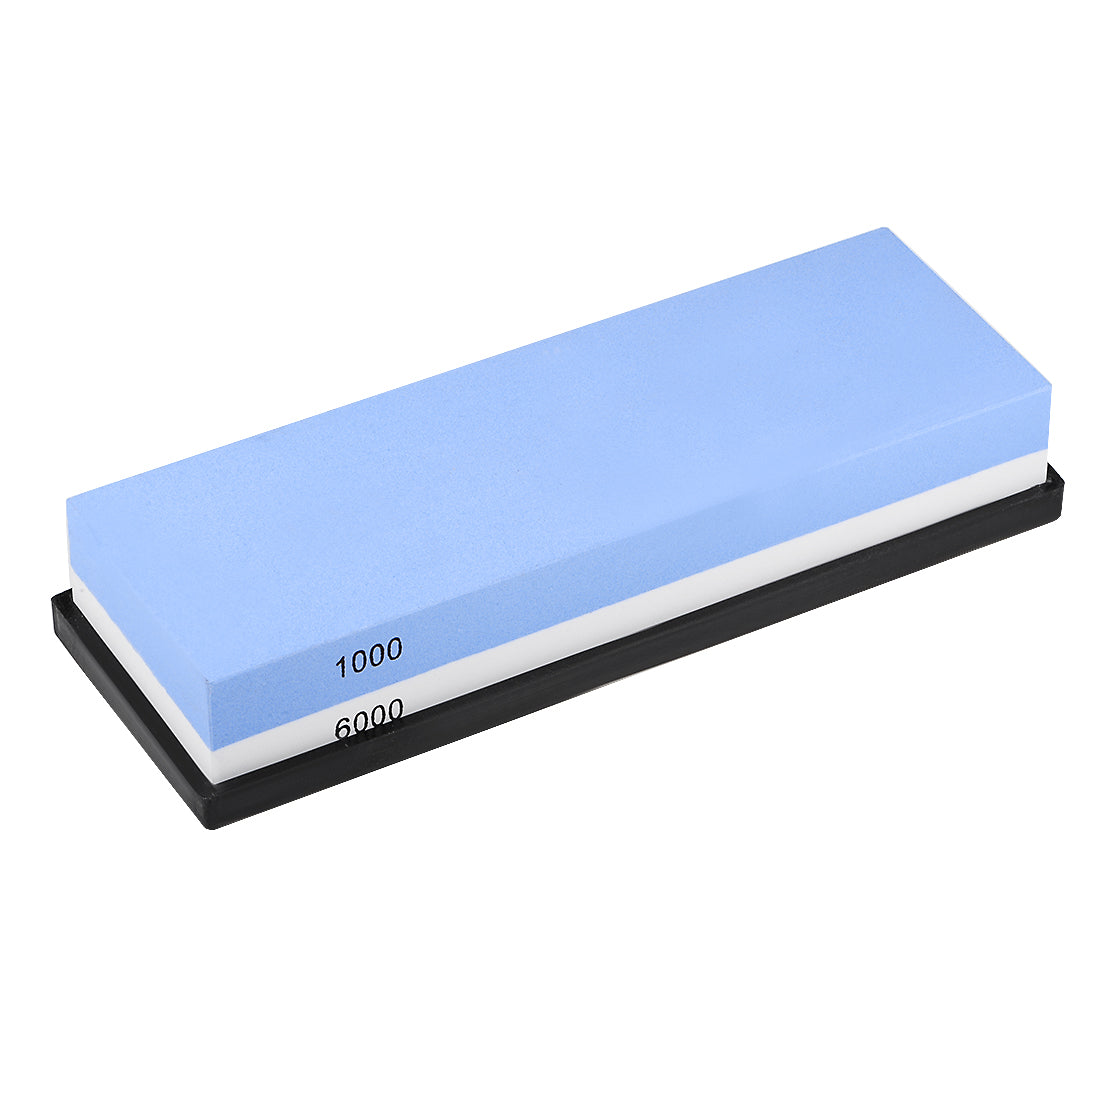 uxcell Uxcell Double-Sided Whetstone Knives Sharpener Sharpening Stone 1000/6000 Grit for Scissors Razors Carving Tool